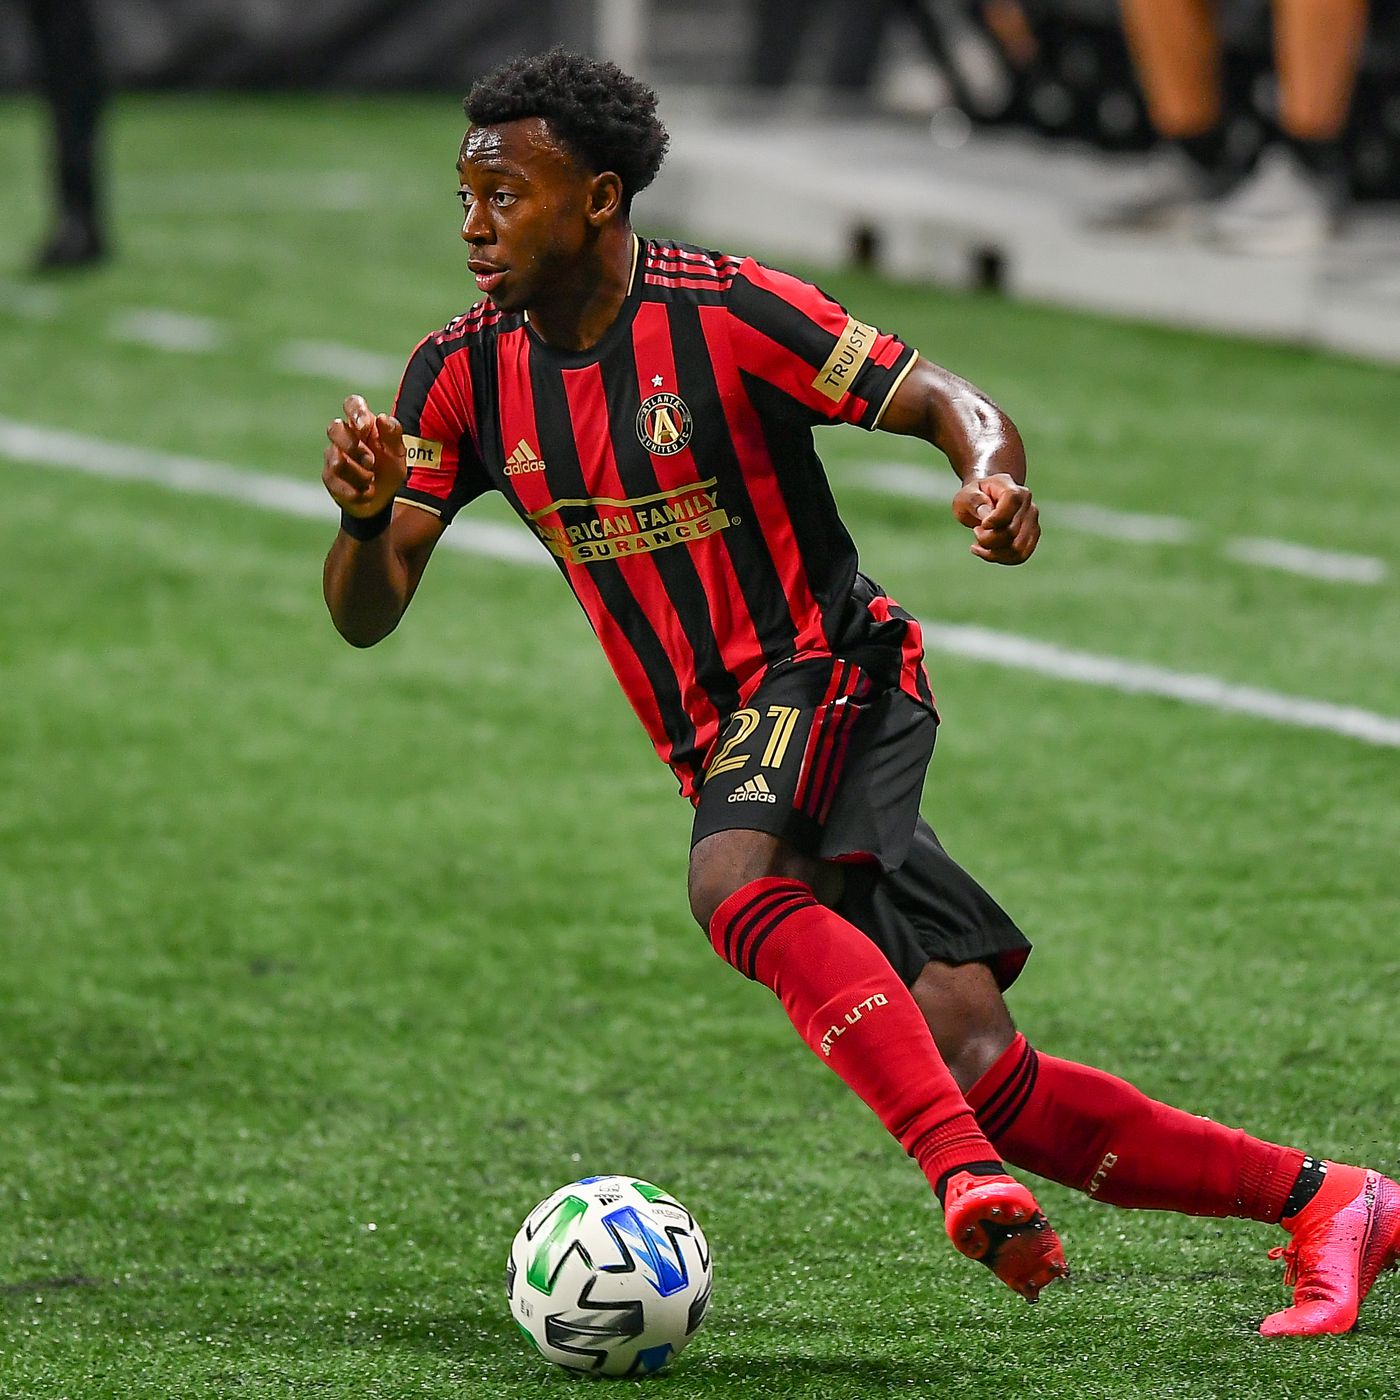 Bello is playing for Atlanta United